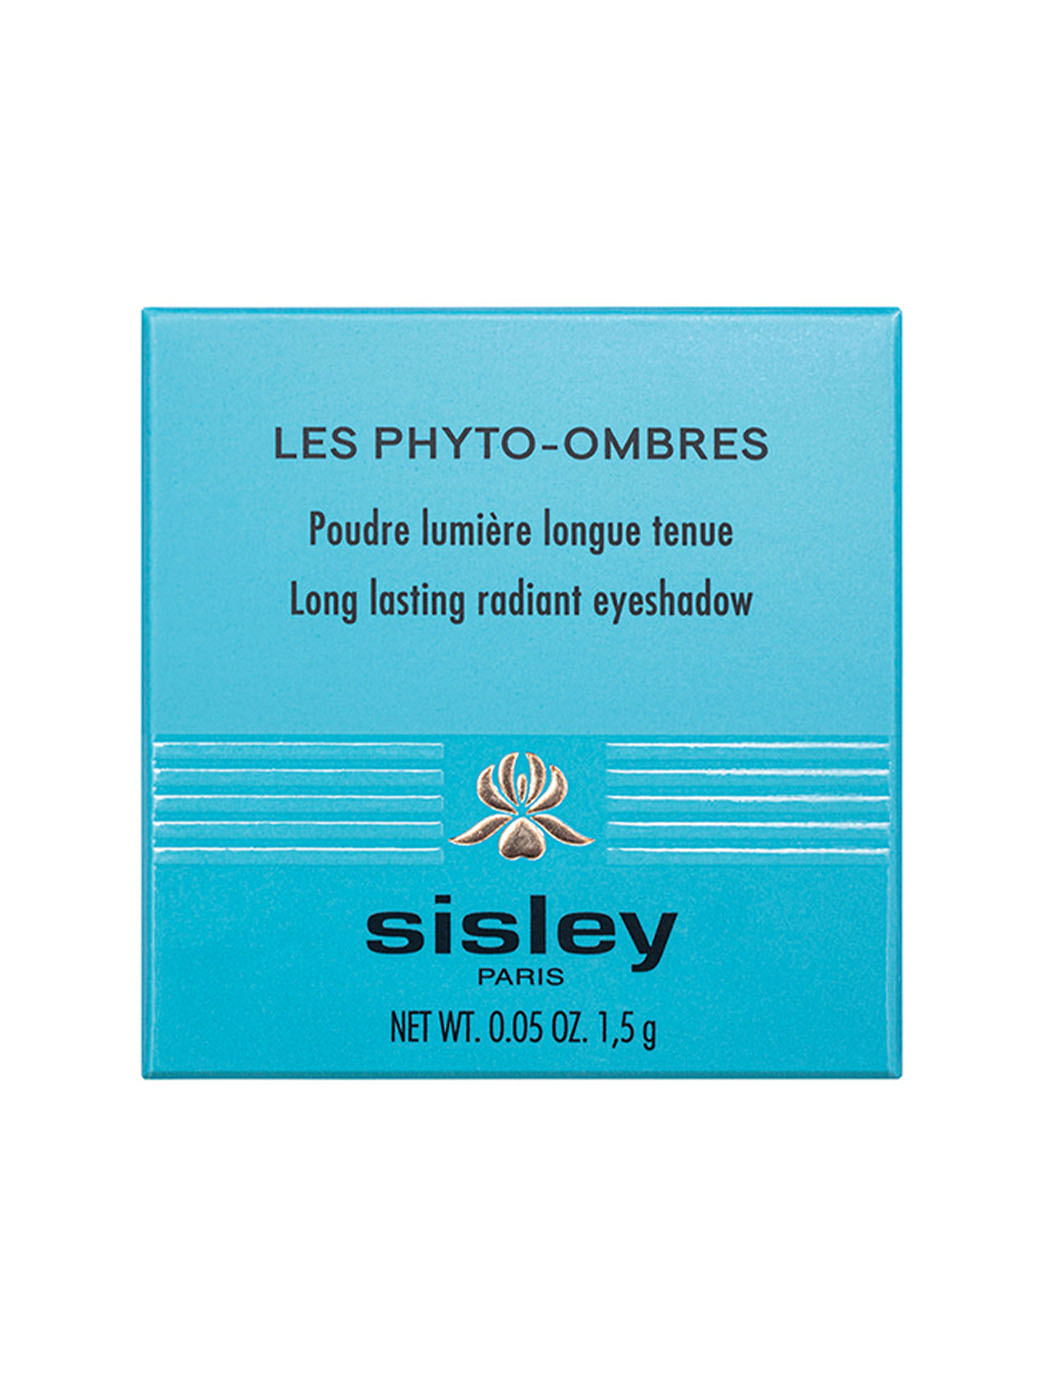 42472956690582 - Les Phyto-Ombres